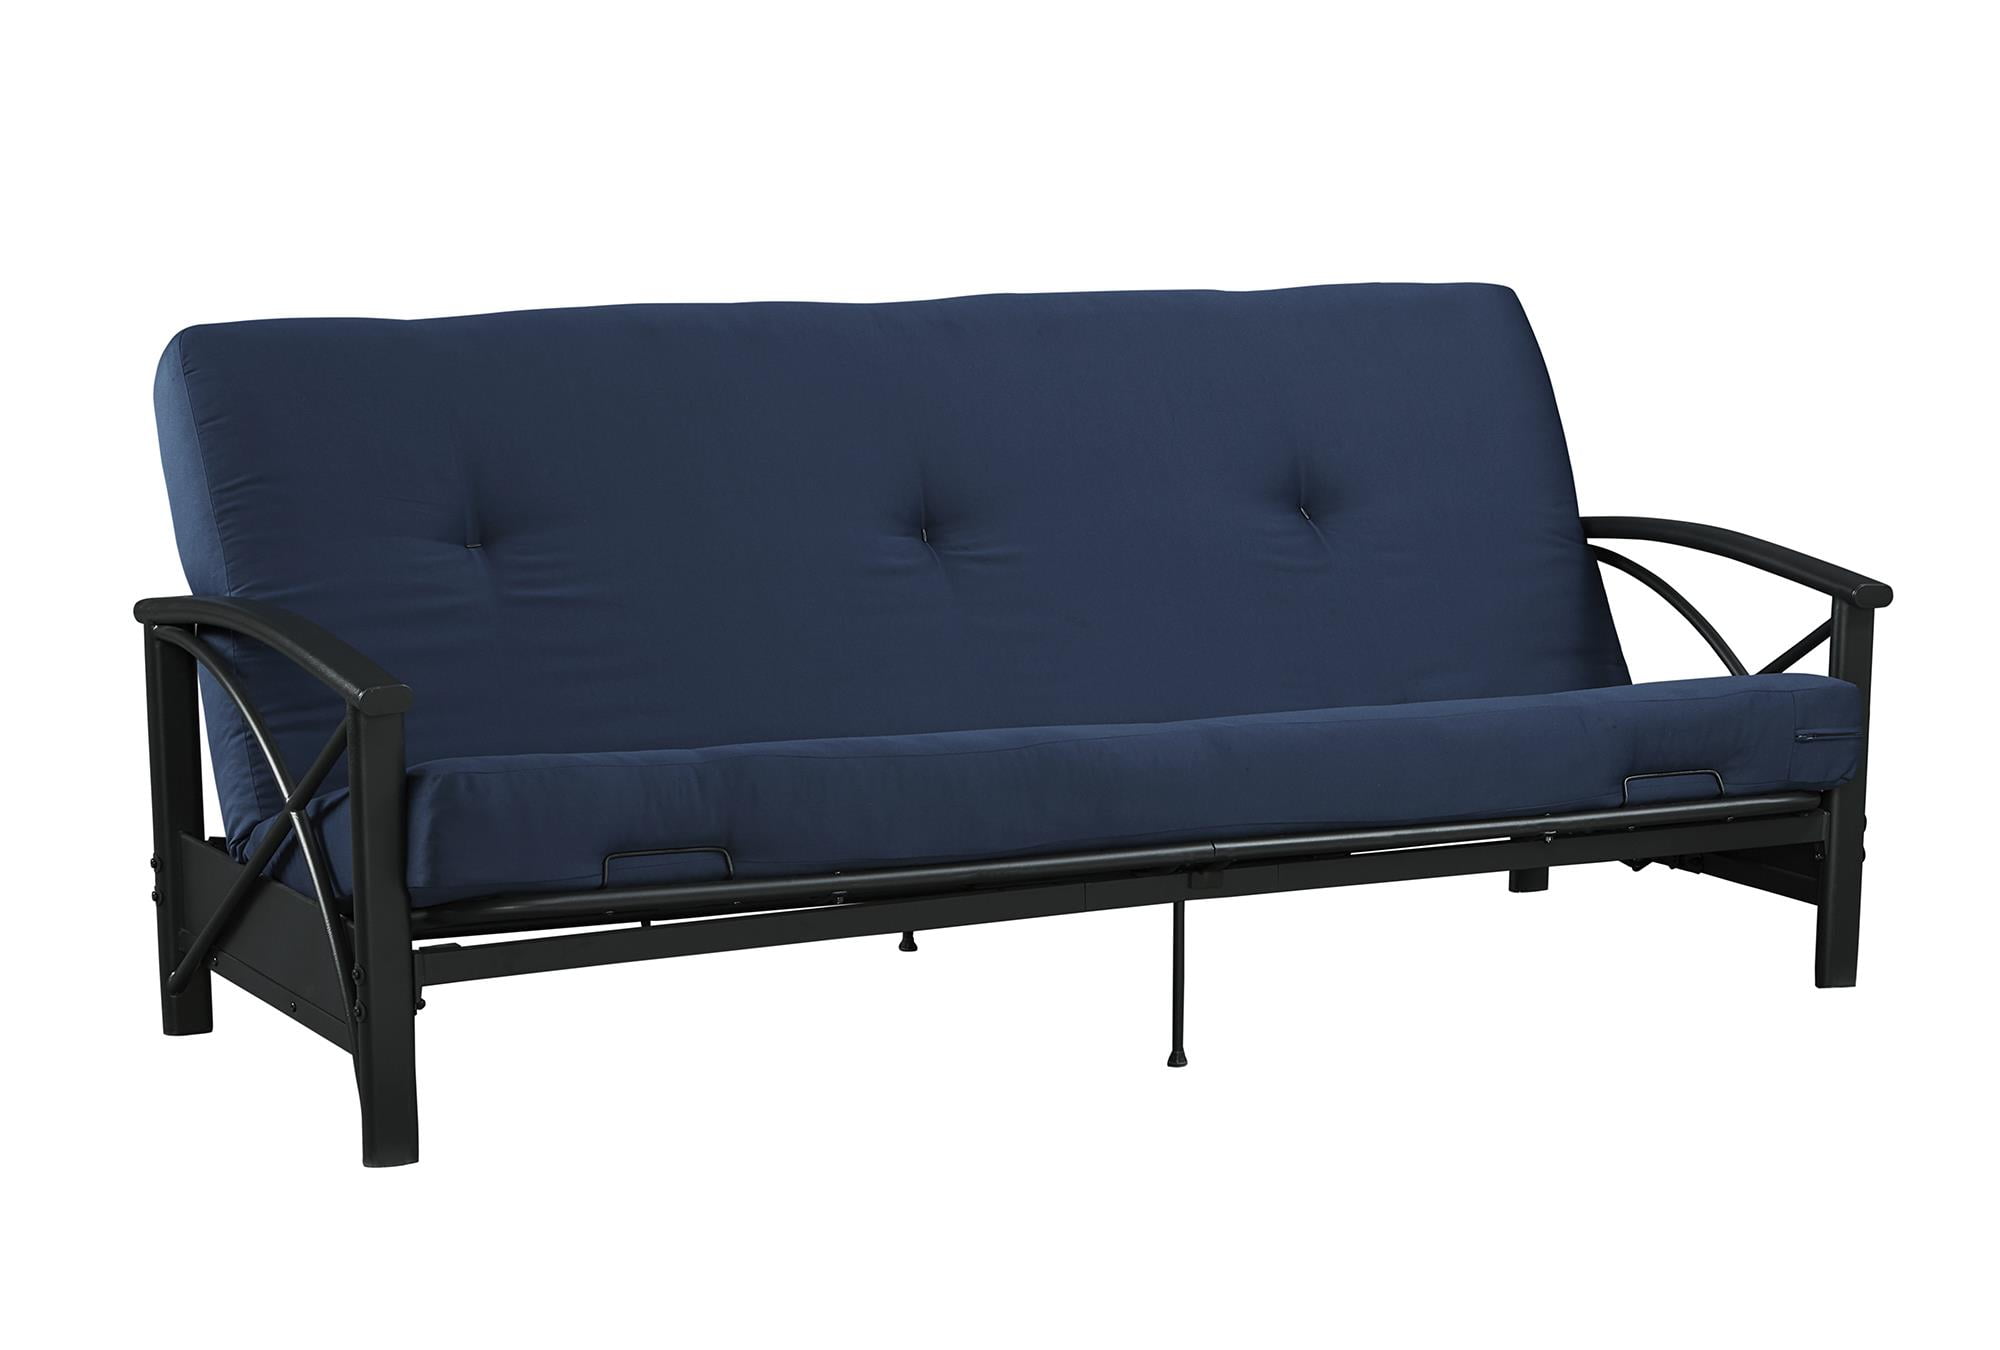 3 Seater Futon Mattress - Shop online and save up to 56%